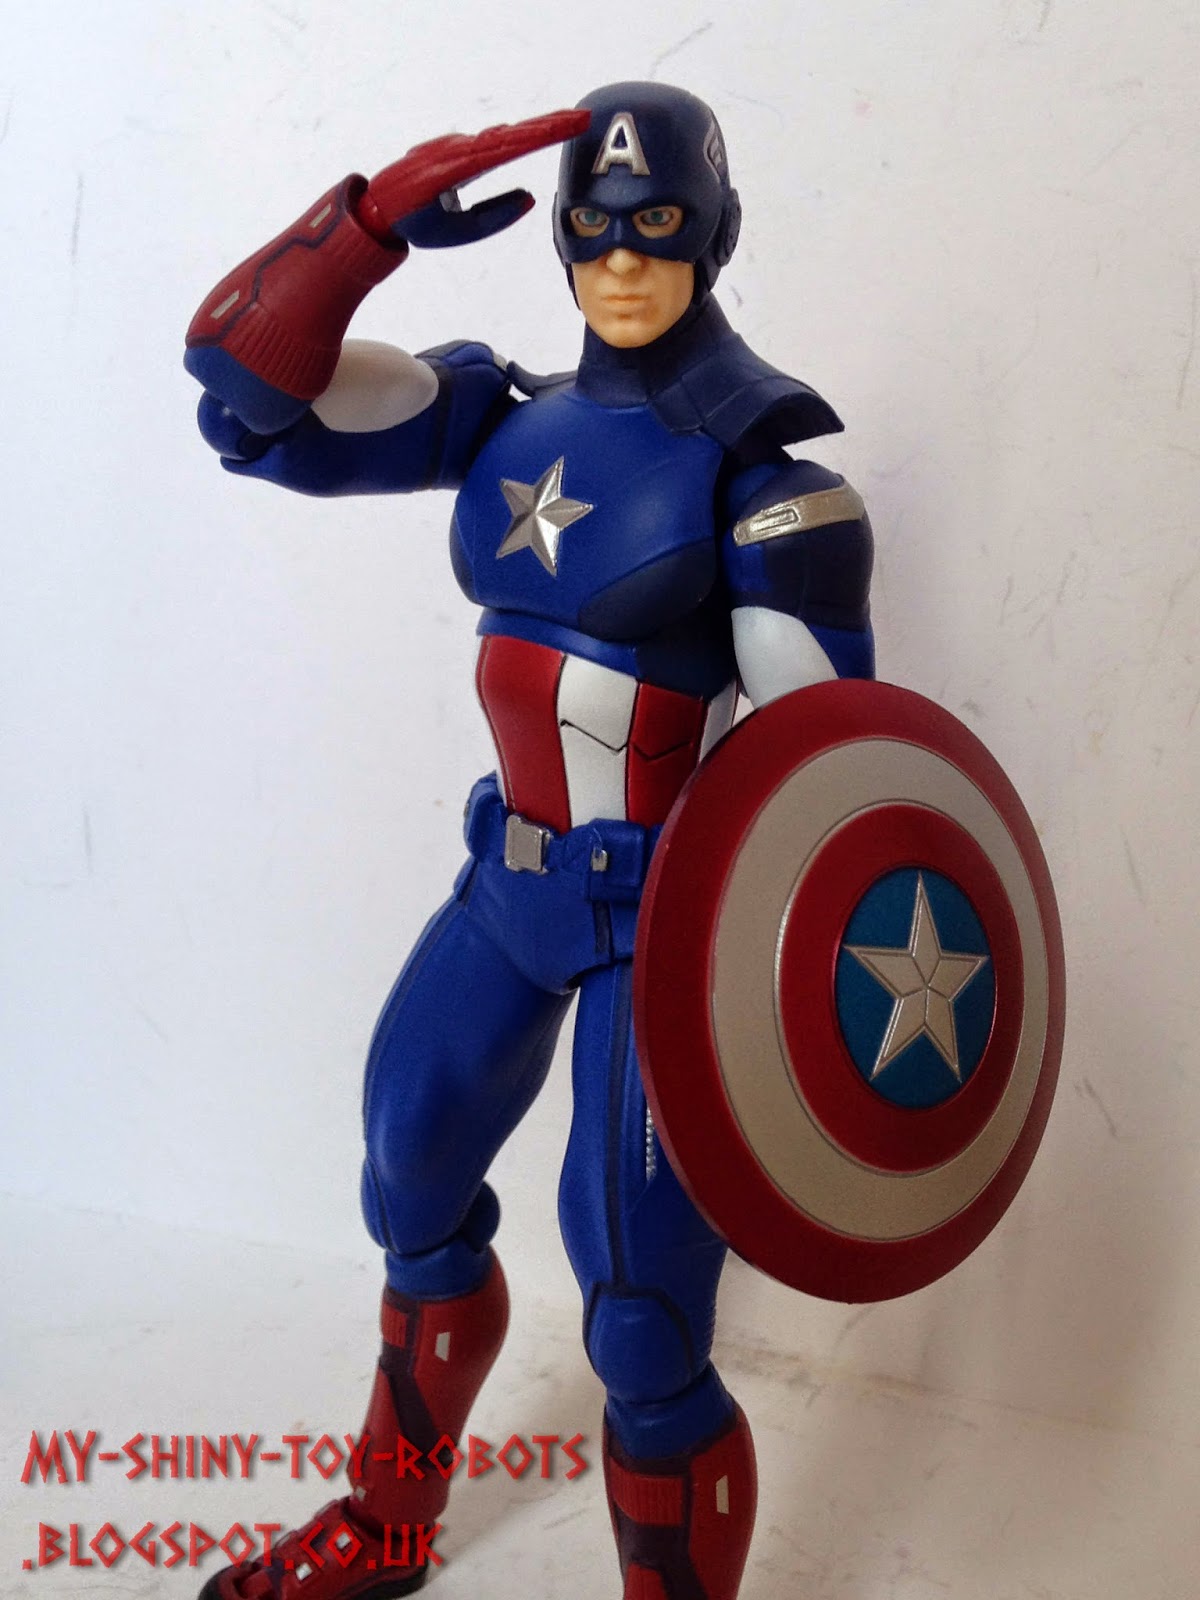 Captain America out of the box